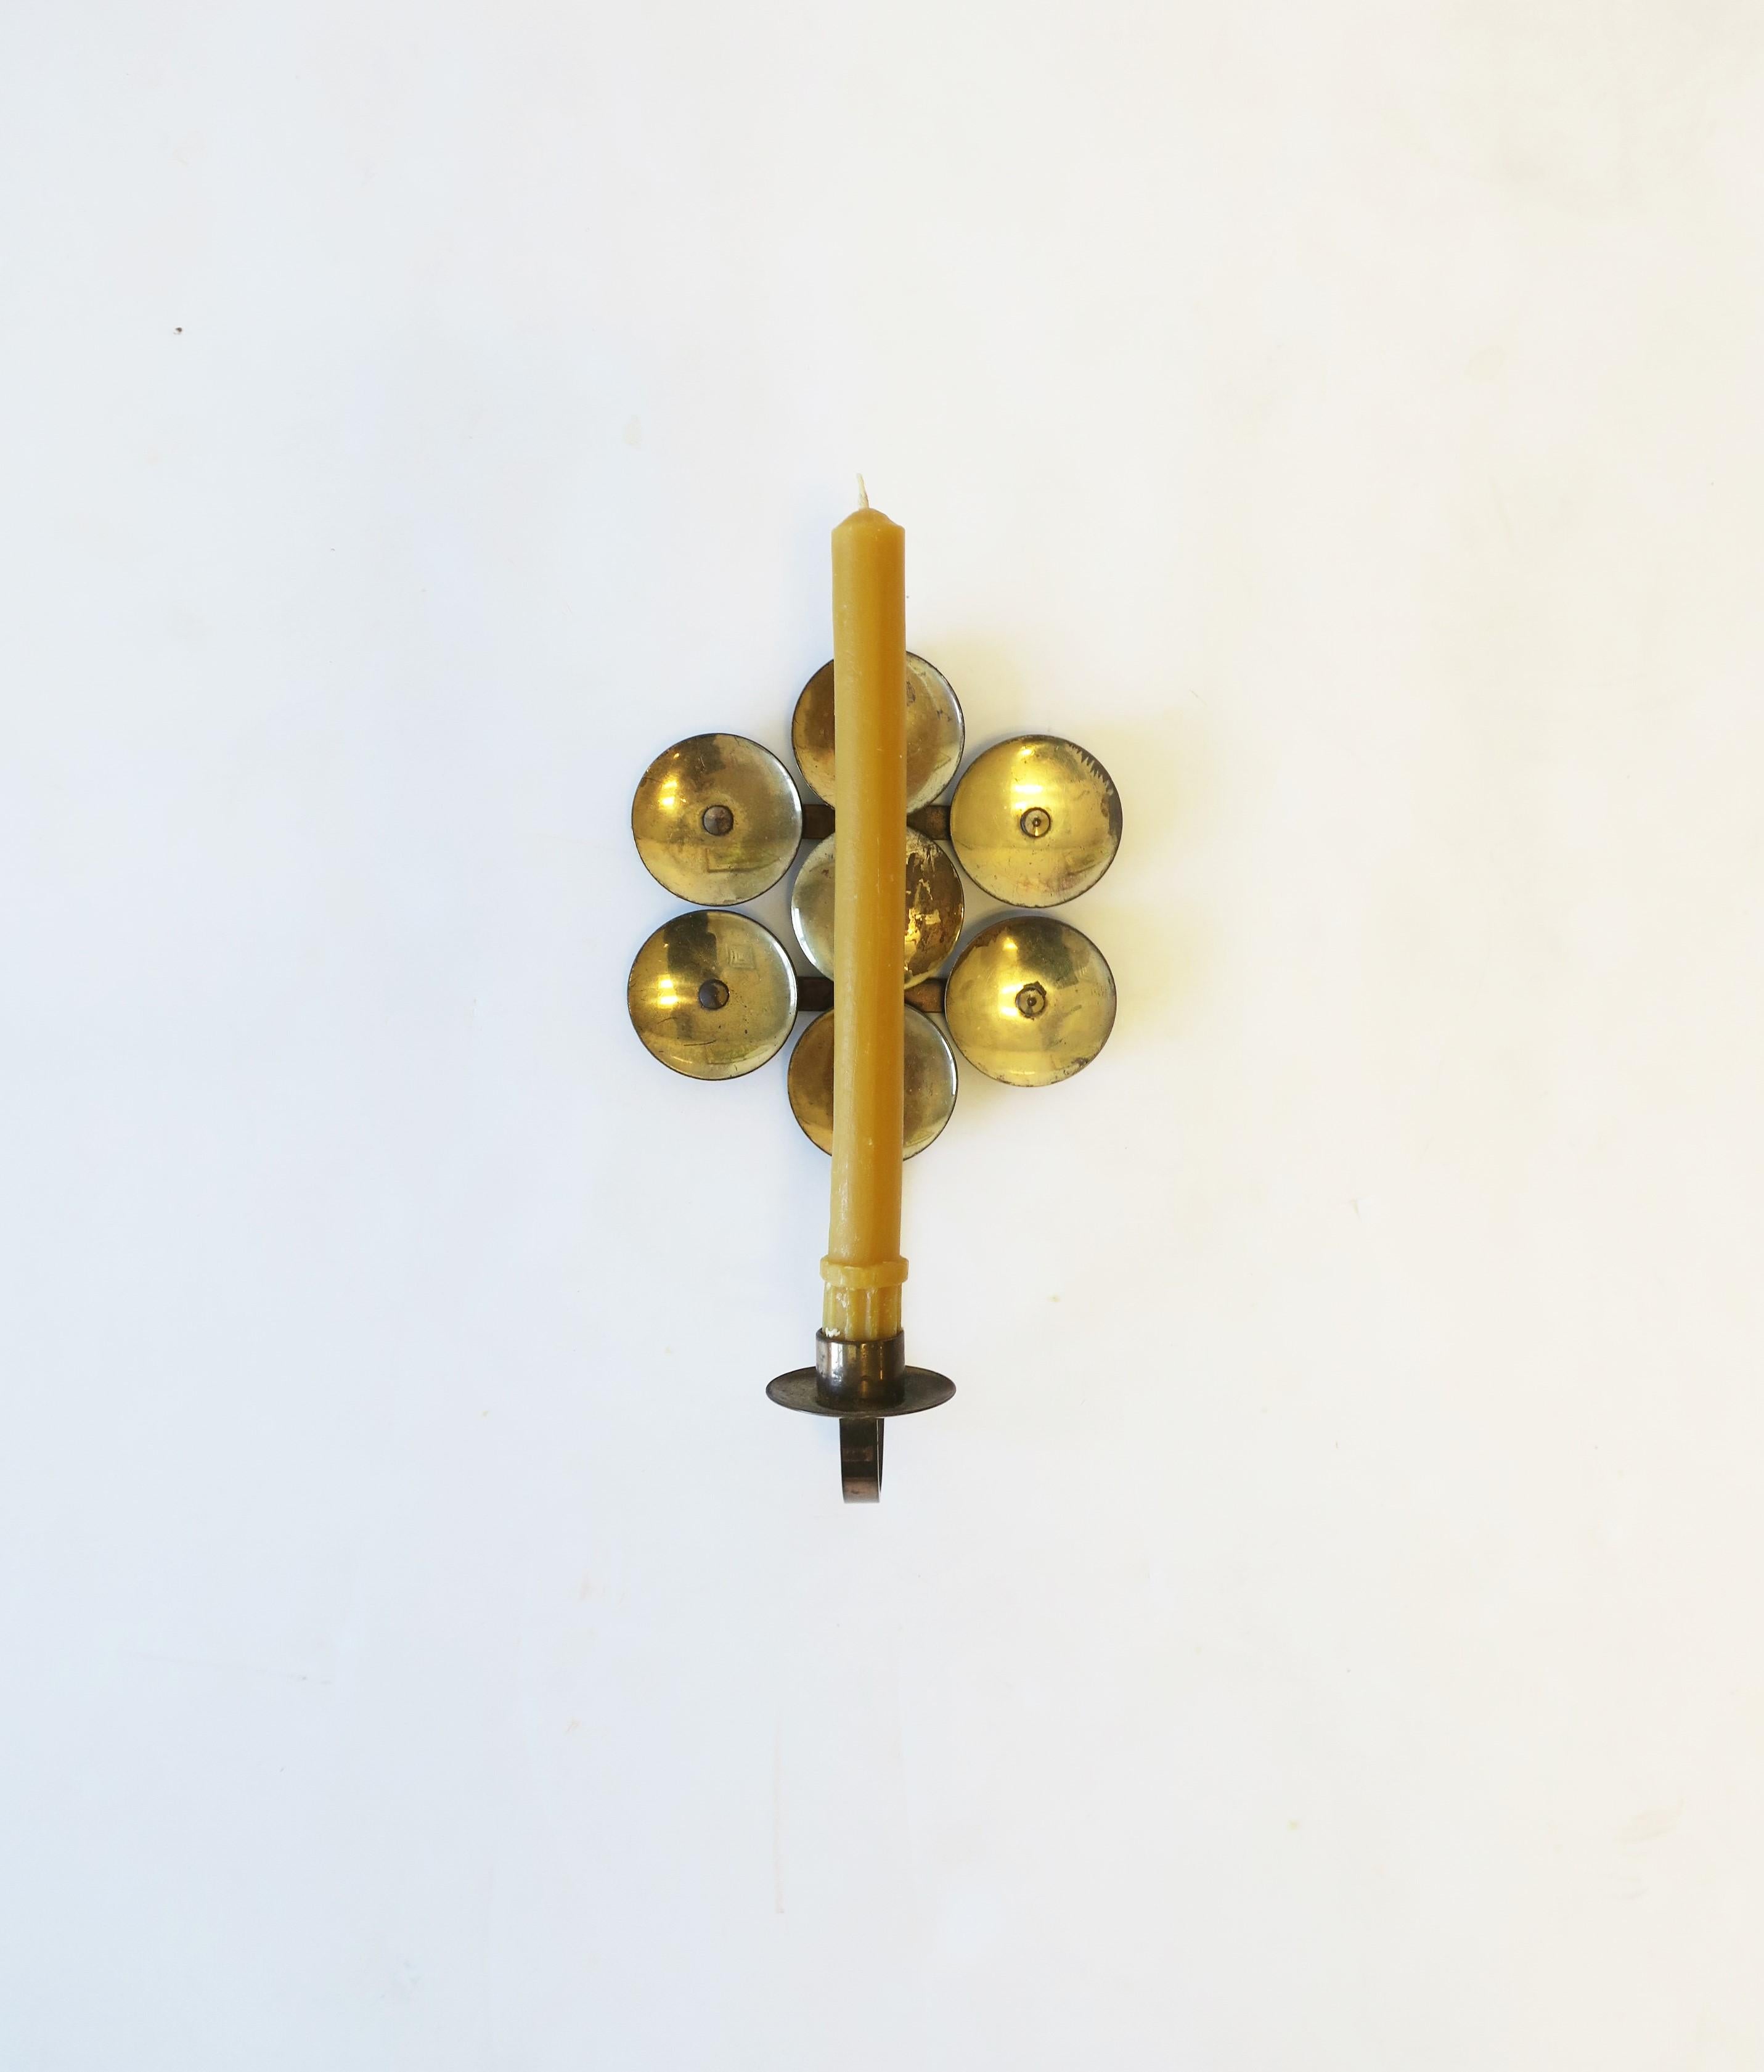 A brass Scandinavian Modern Swedish wall candle sconce, circa mid-20th century, 1960s, Sweden. With maker's mark and origin mark on back as shown in images #9 and 10. Dimensions: 5.5 width x 9.5